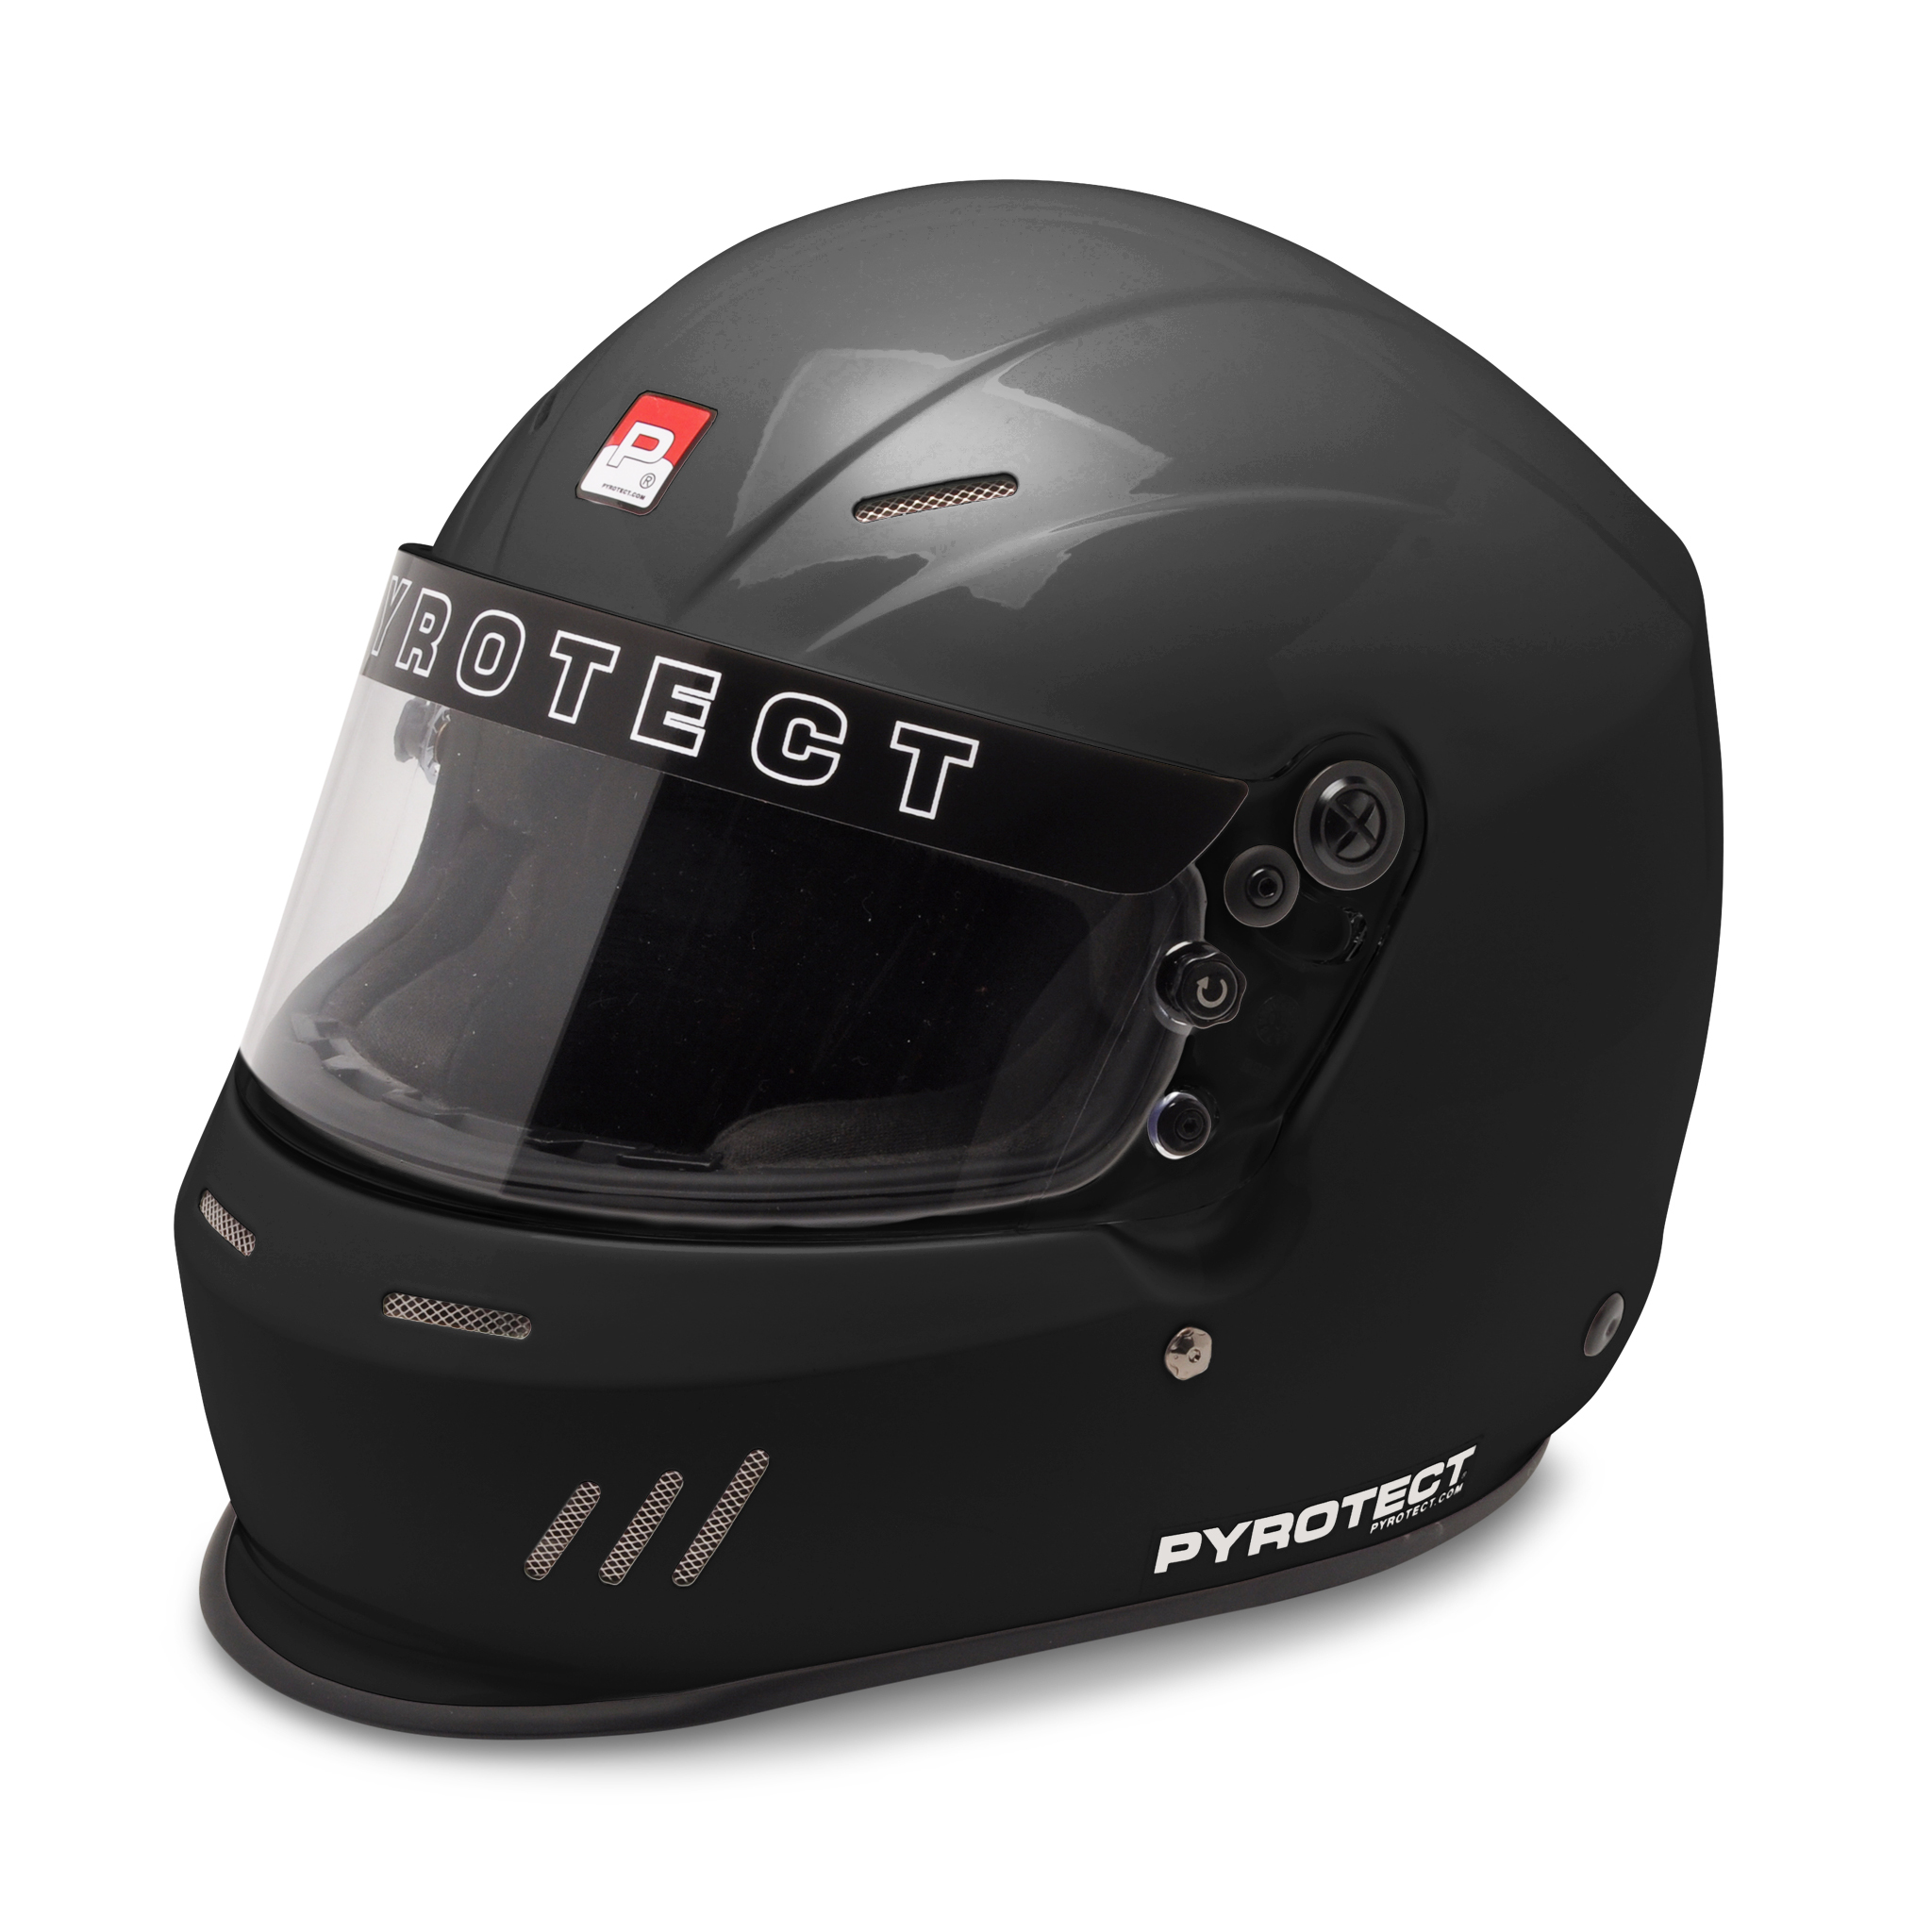 Pyrotect Safety HB611520 Helmet, UltraSport Duckbill, Full Face, Snell SA2020, Head and Neck Support Ready, Gloss Black, X-Large, Each